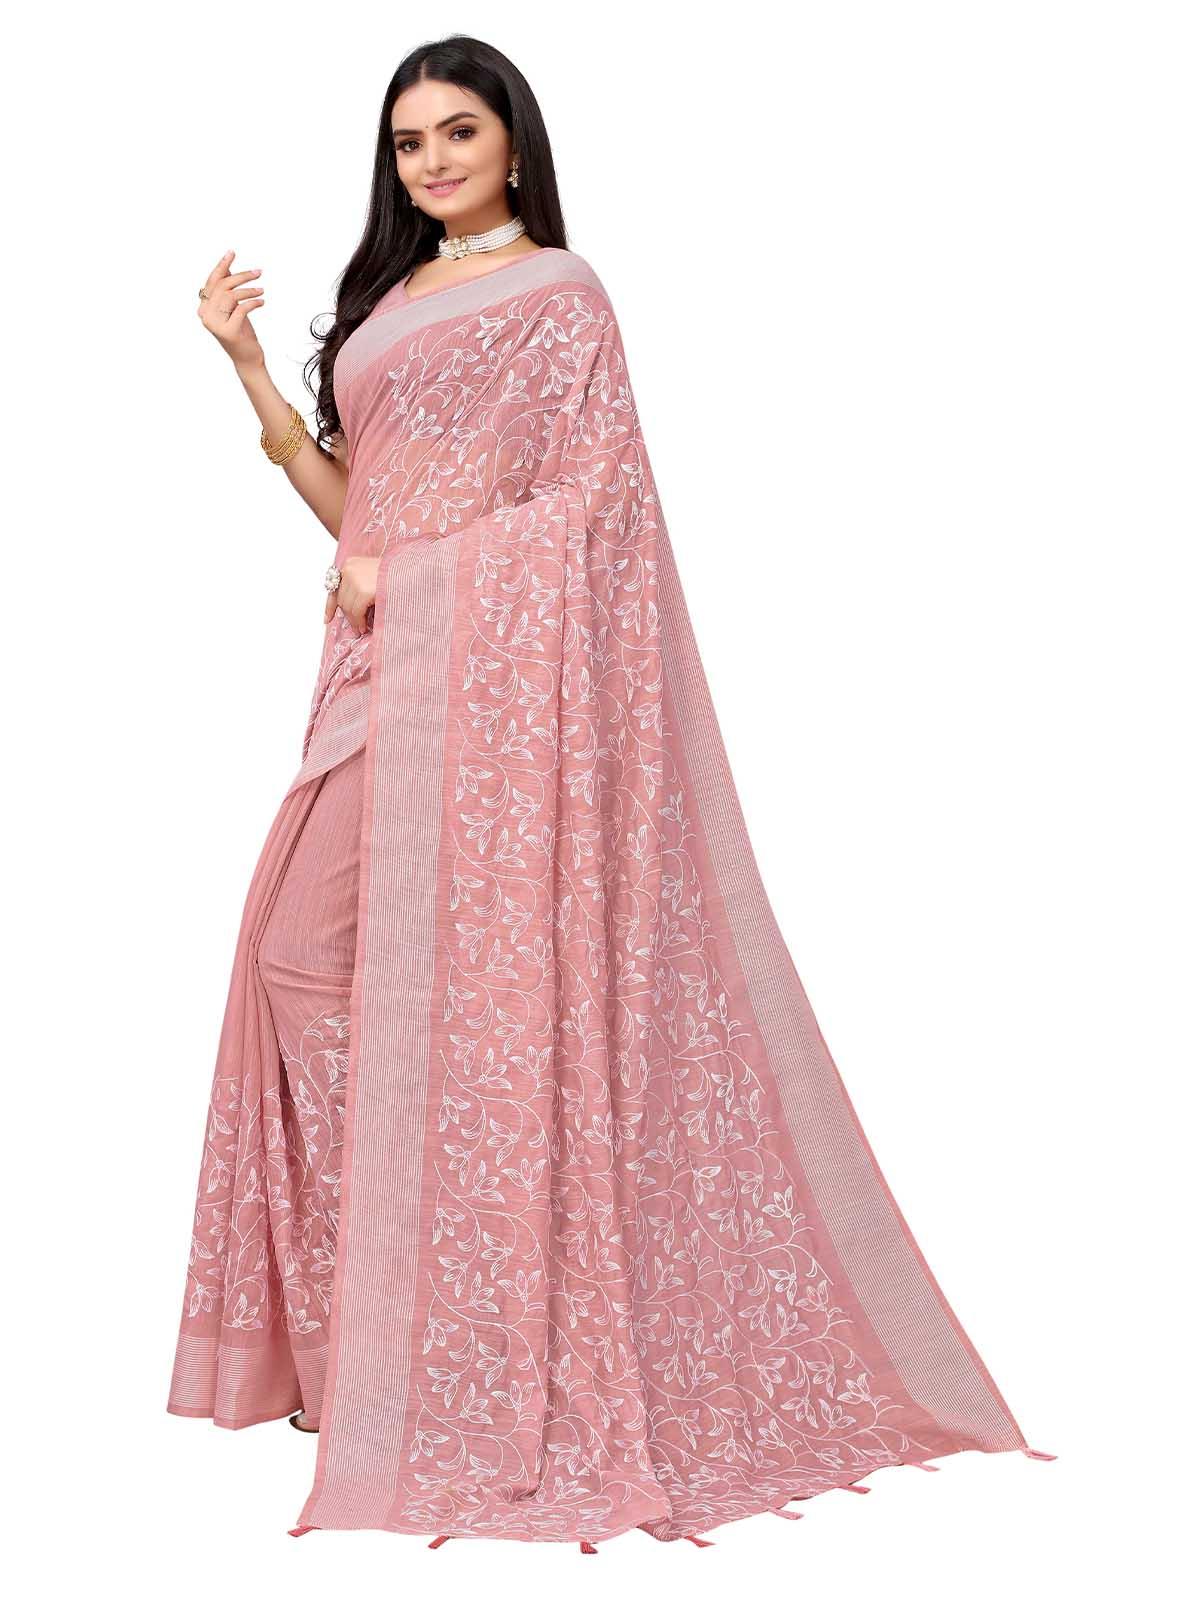 Women's Pink Pure Cotton Embroidered Saree With Blouse - Odette